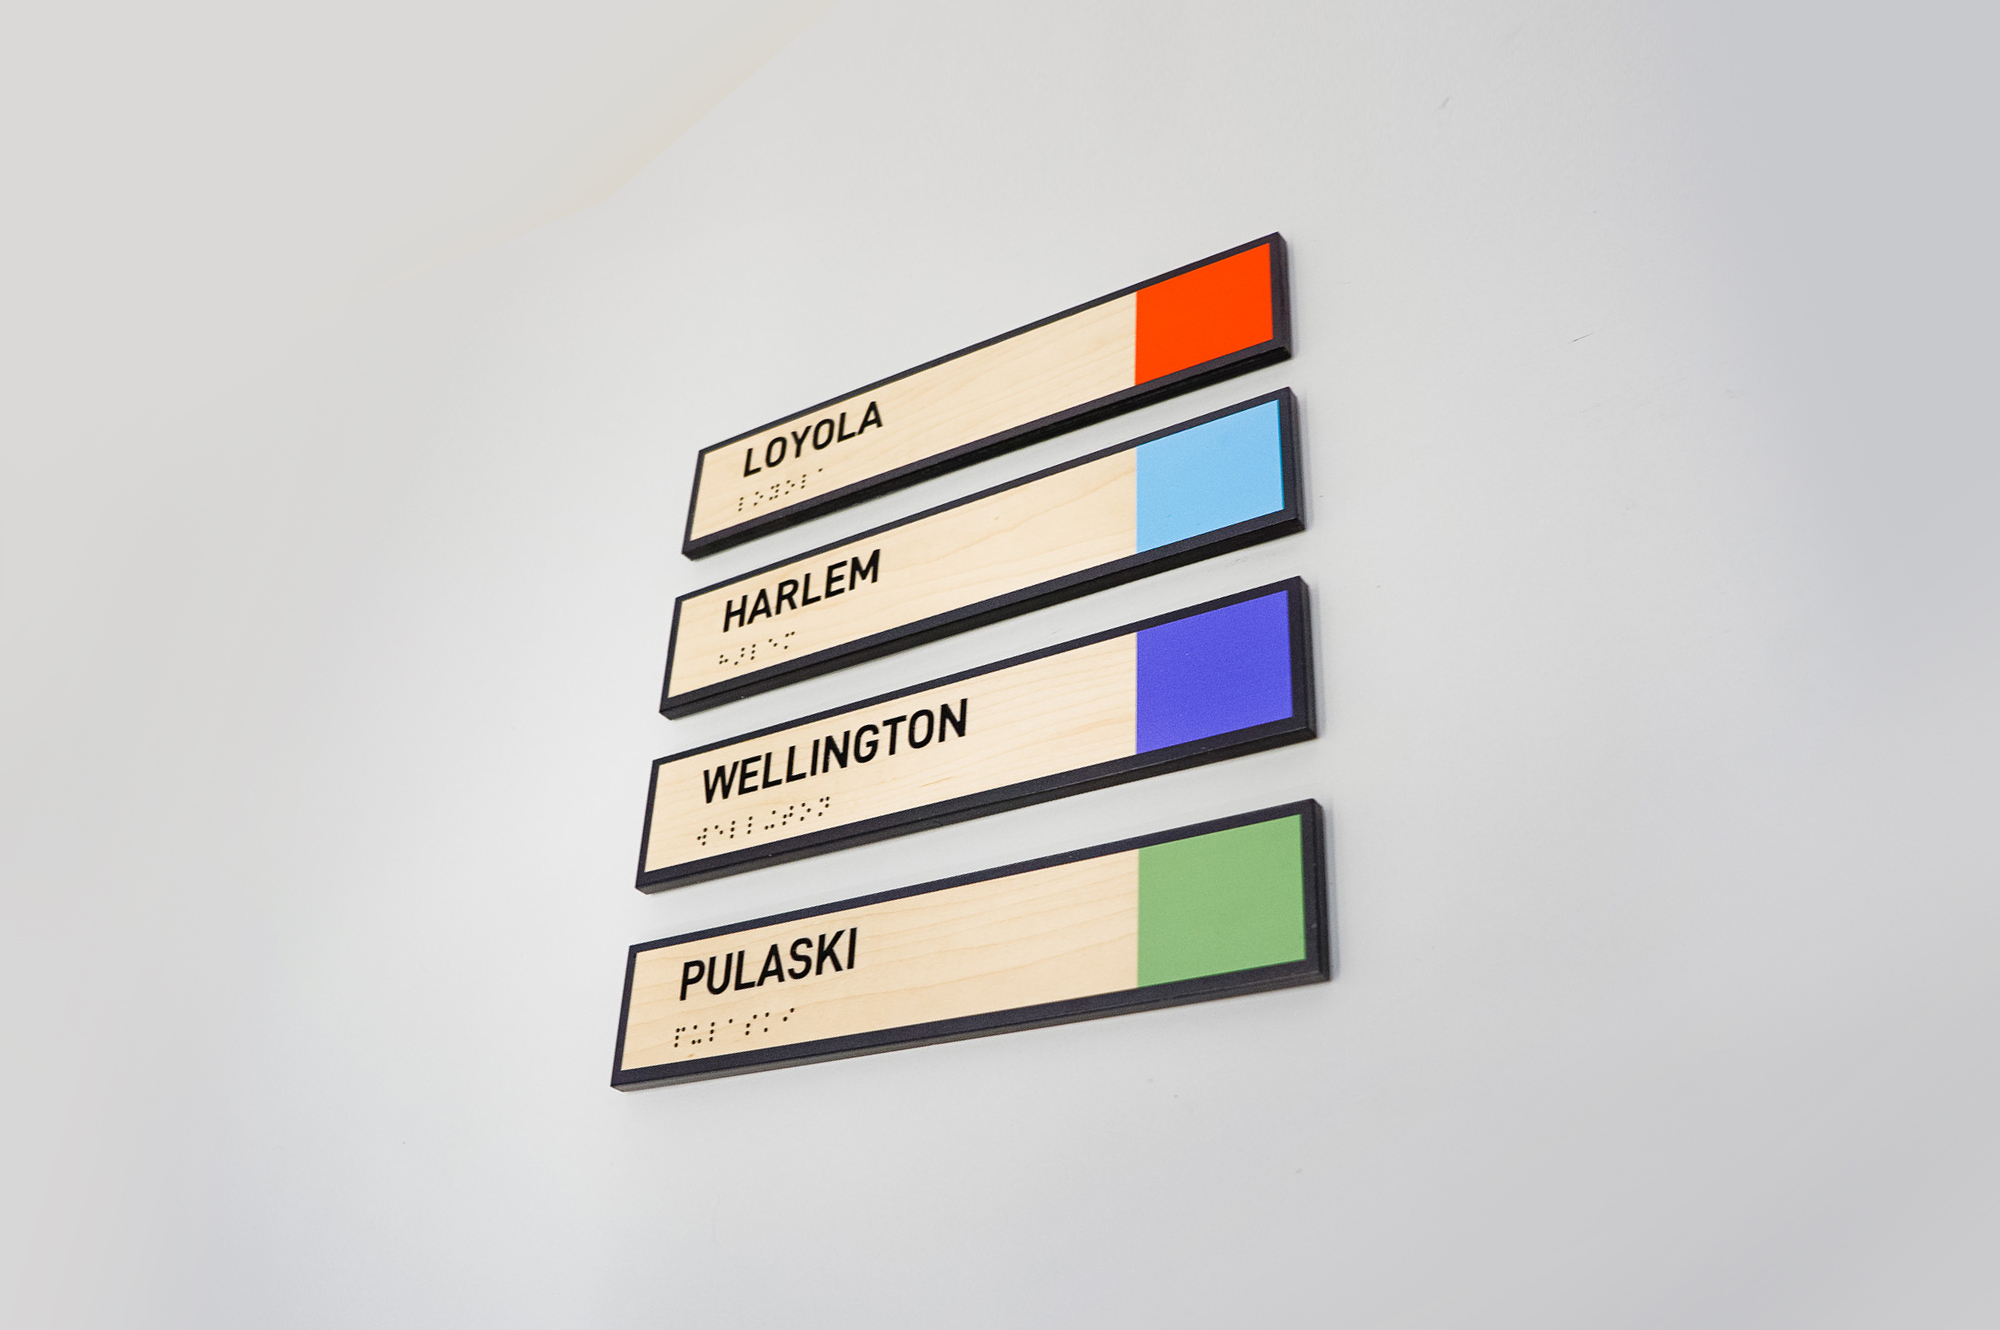 Light wood, color-coded phone booth signs for G2, a company that compares business software and services based on user ratings.